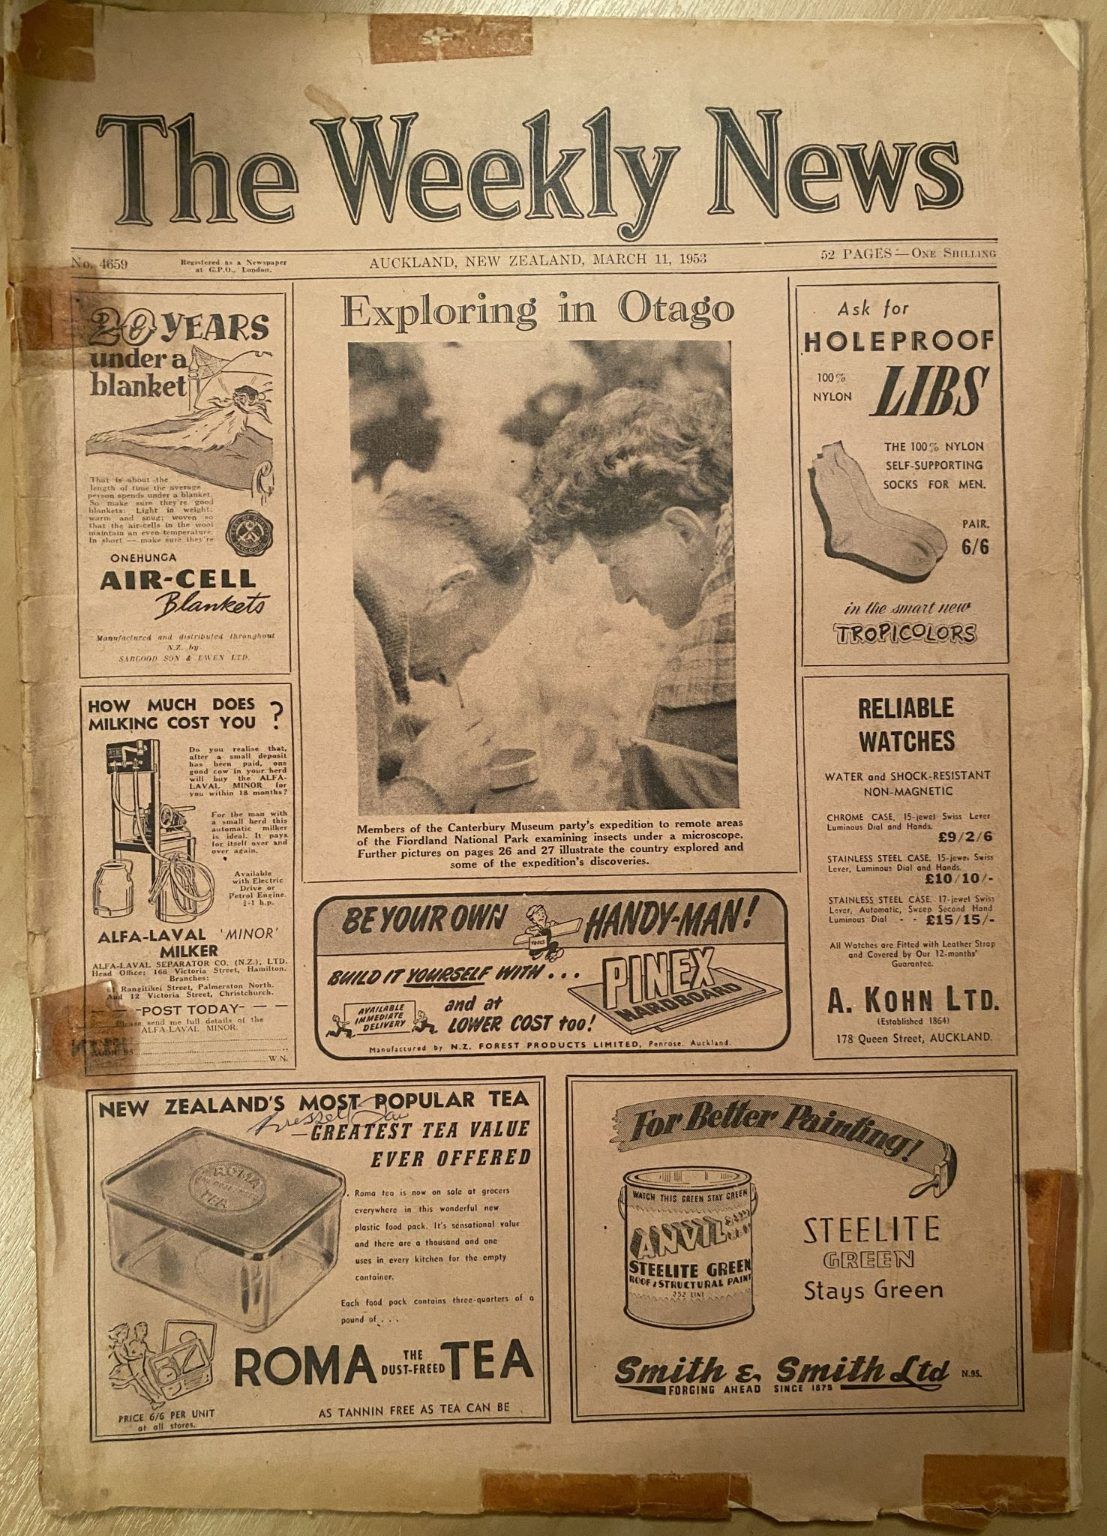 OLD NEWSPAPER: The Weekly News - No. 4659, 11 March 1953